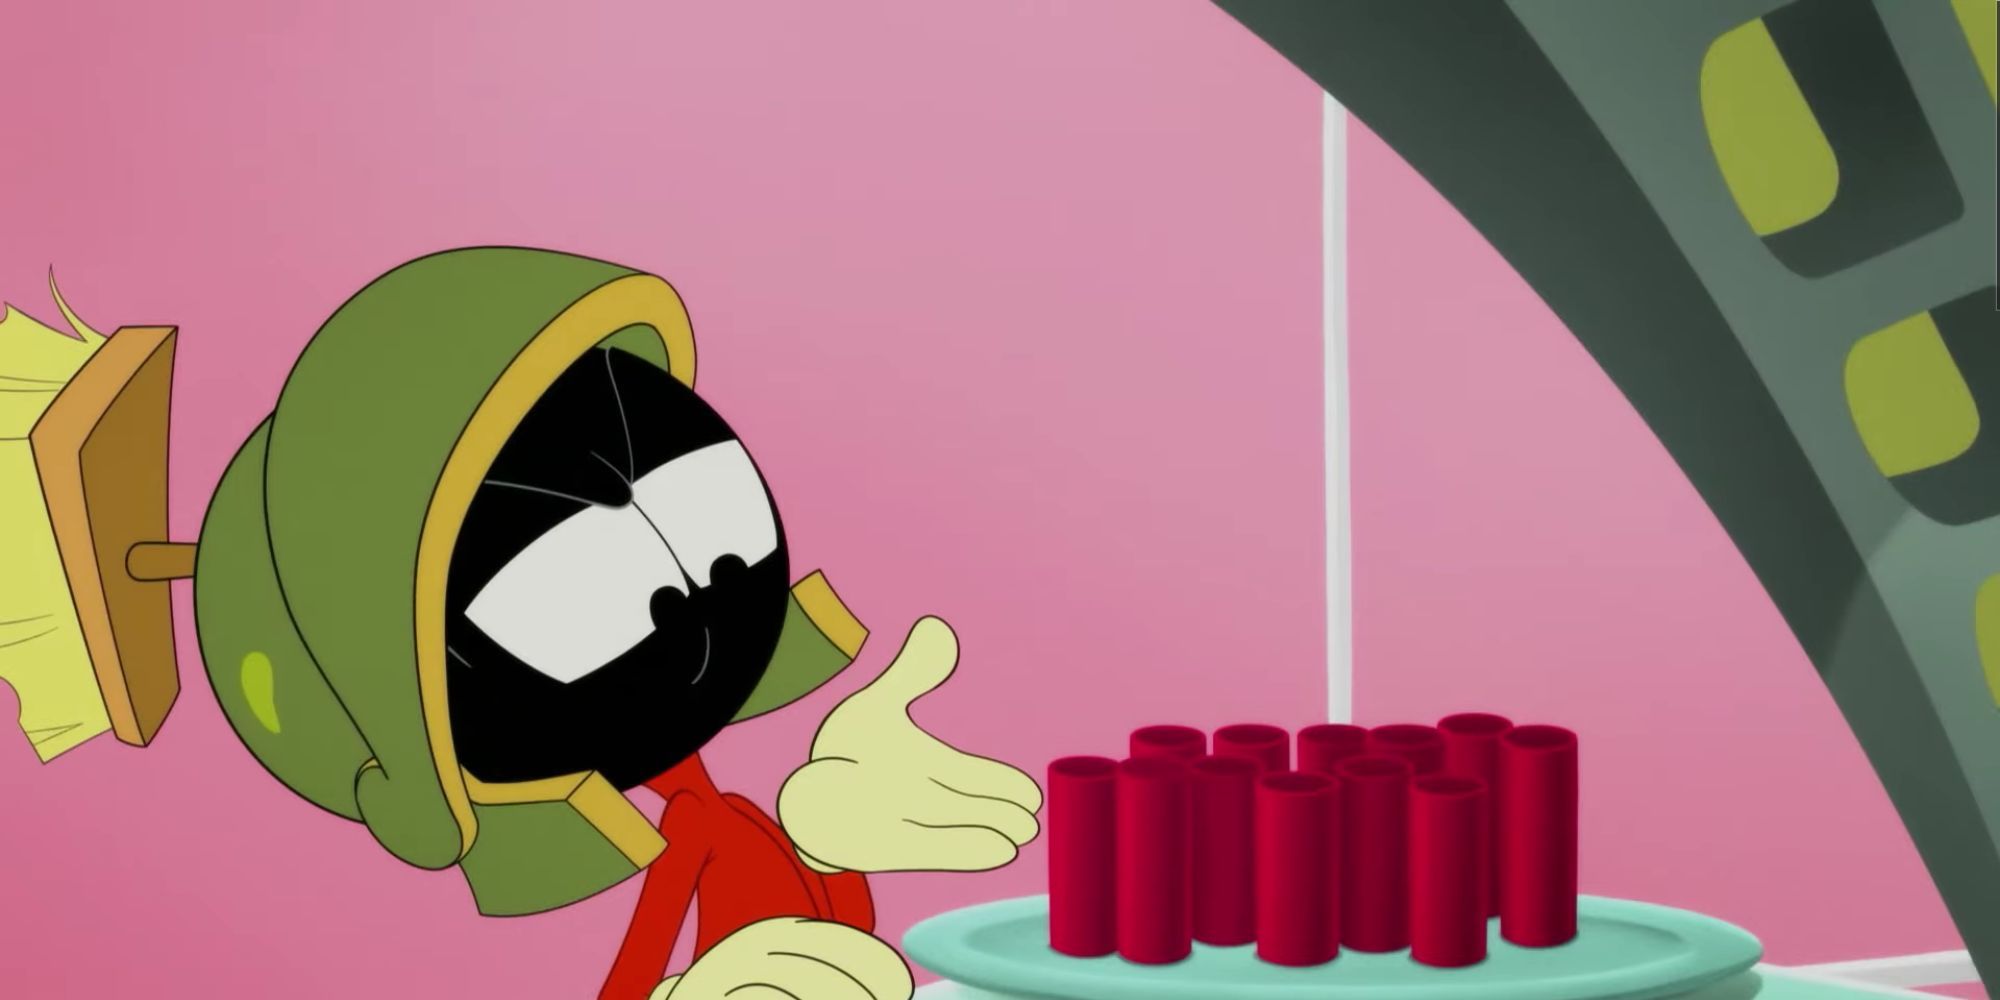 Marvin the Martian looking at a plate of dynamite.